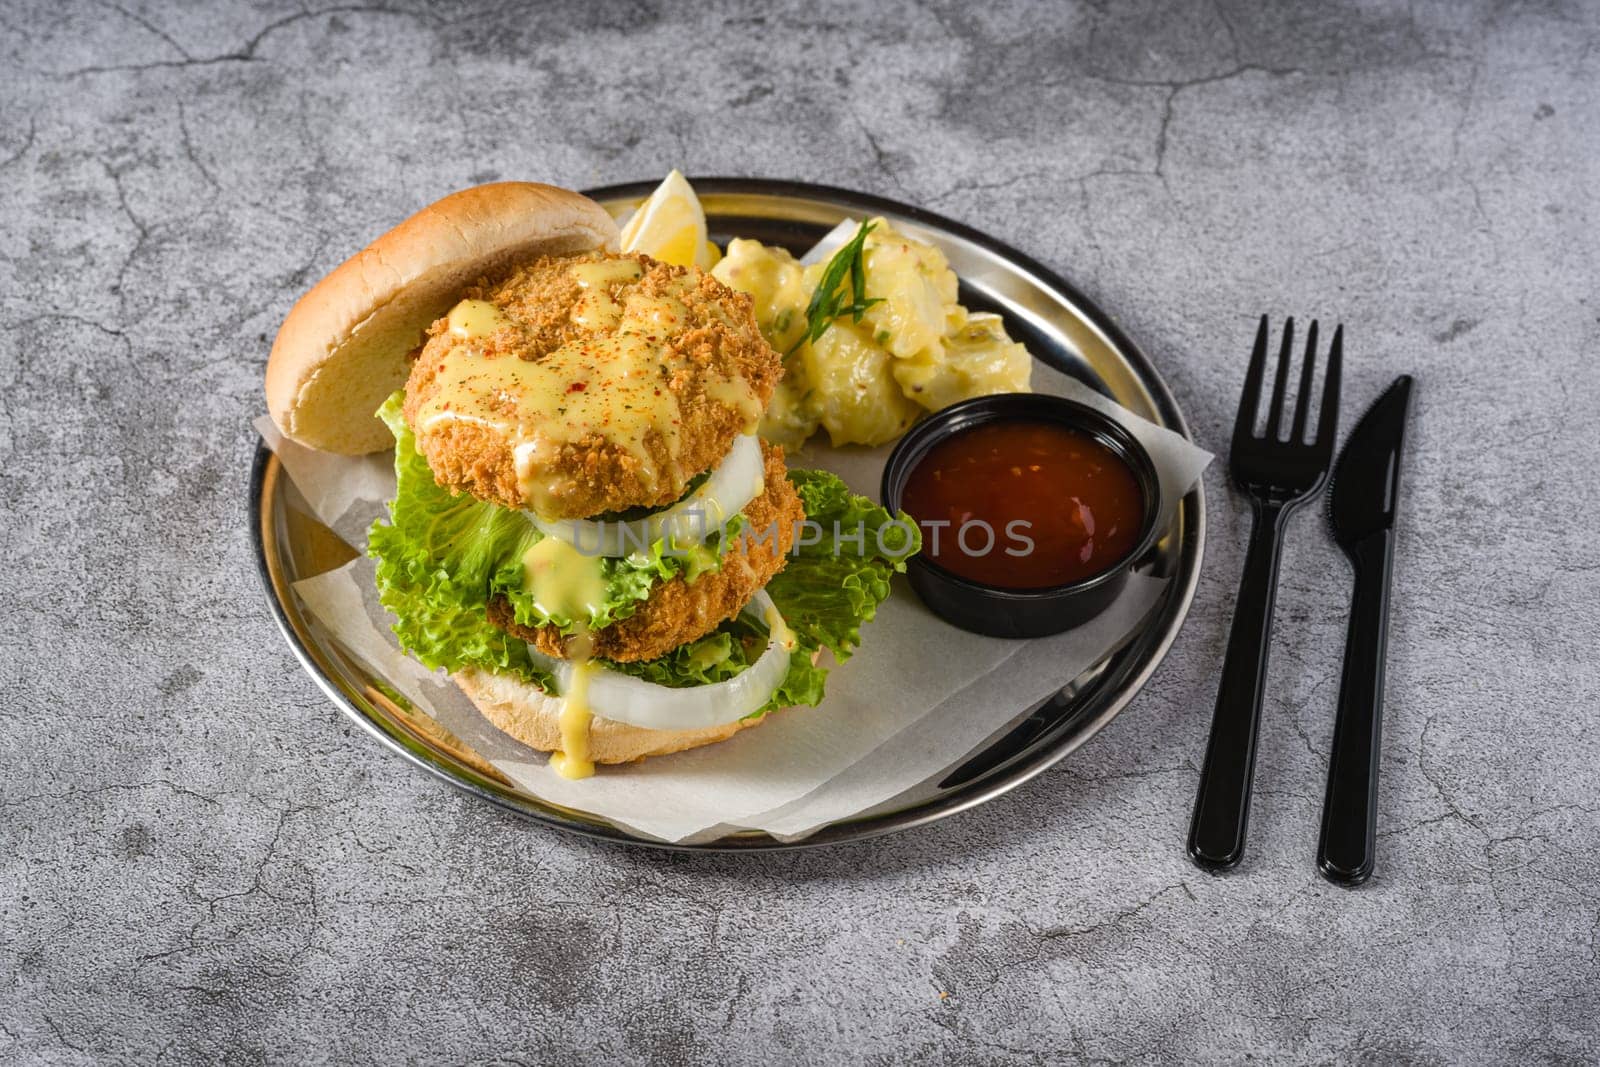 Double fish burger with potato salad on a metal plate